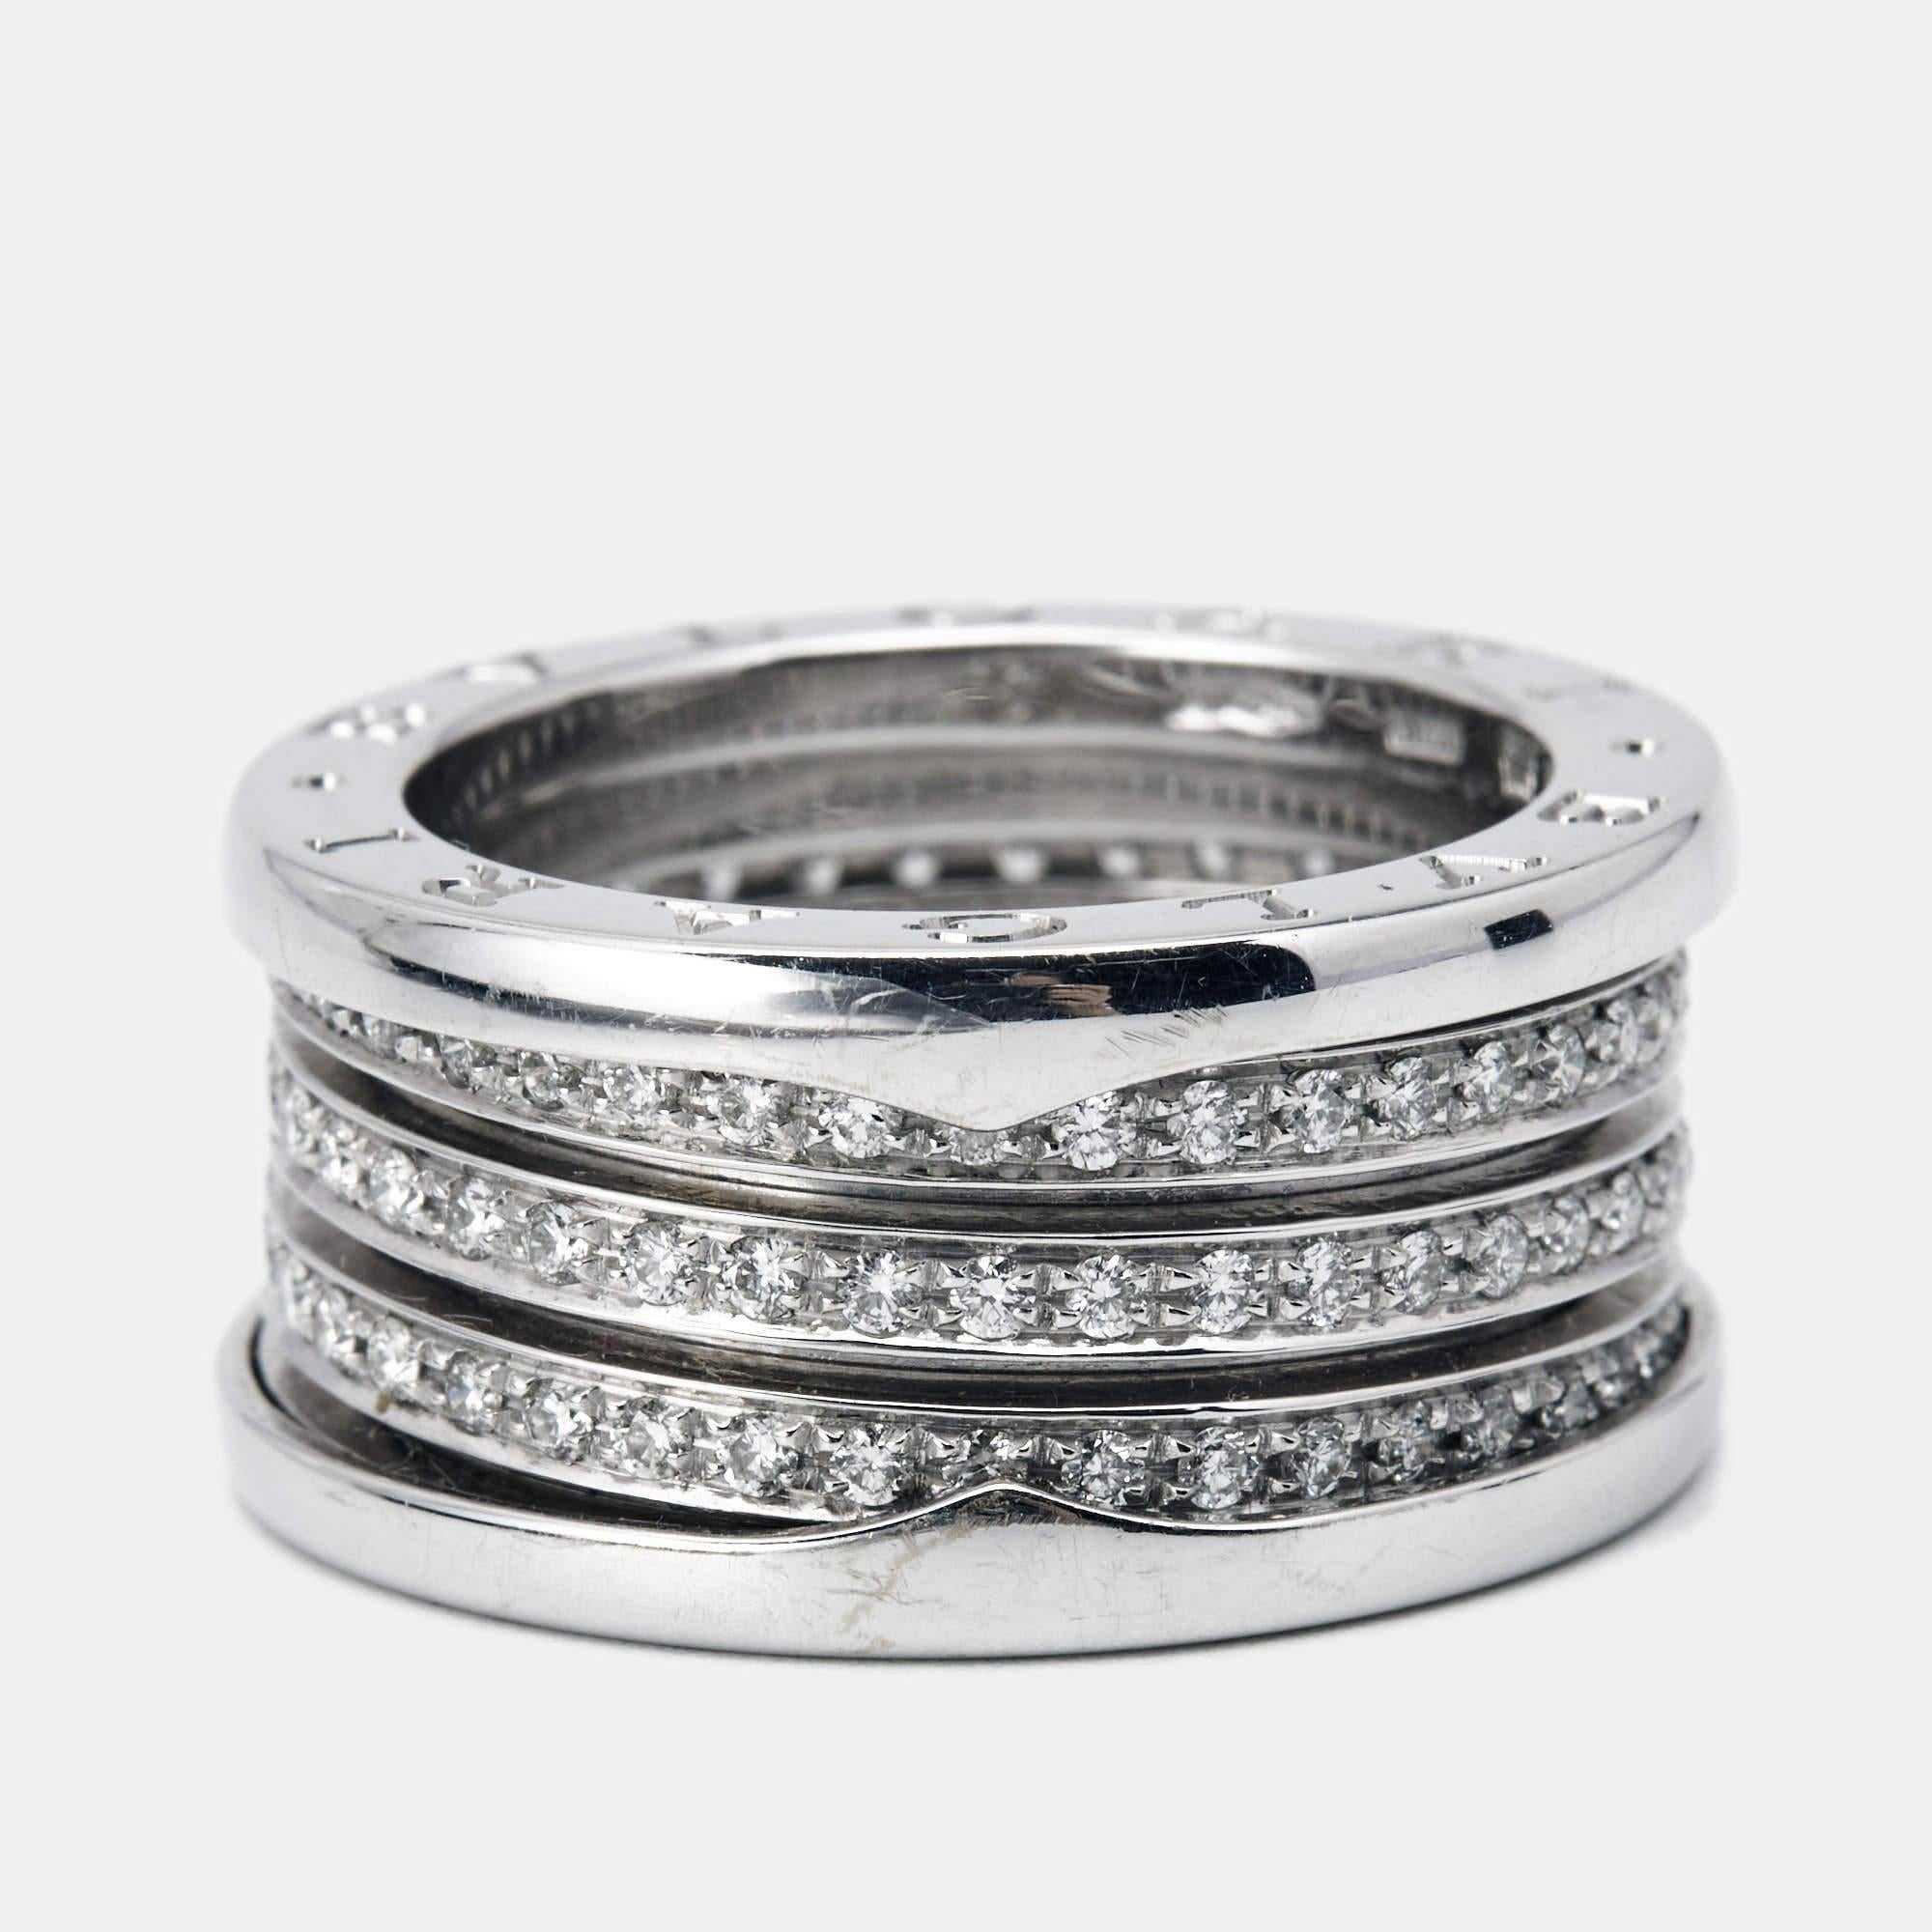 The Bvlgari B.Zero1 ring is a luxurious and captivating piece of jewelry. Crafted in 18k white gold, it features the iconic B.Zero1 spiral design, representing eternity and modernity. Adorned with brilliant-cut diamonds, this ring adds a sparkling